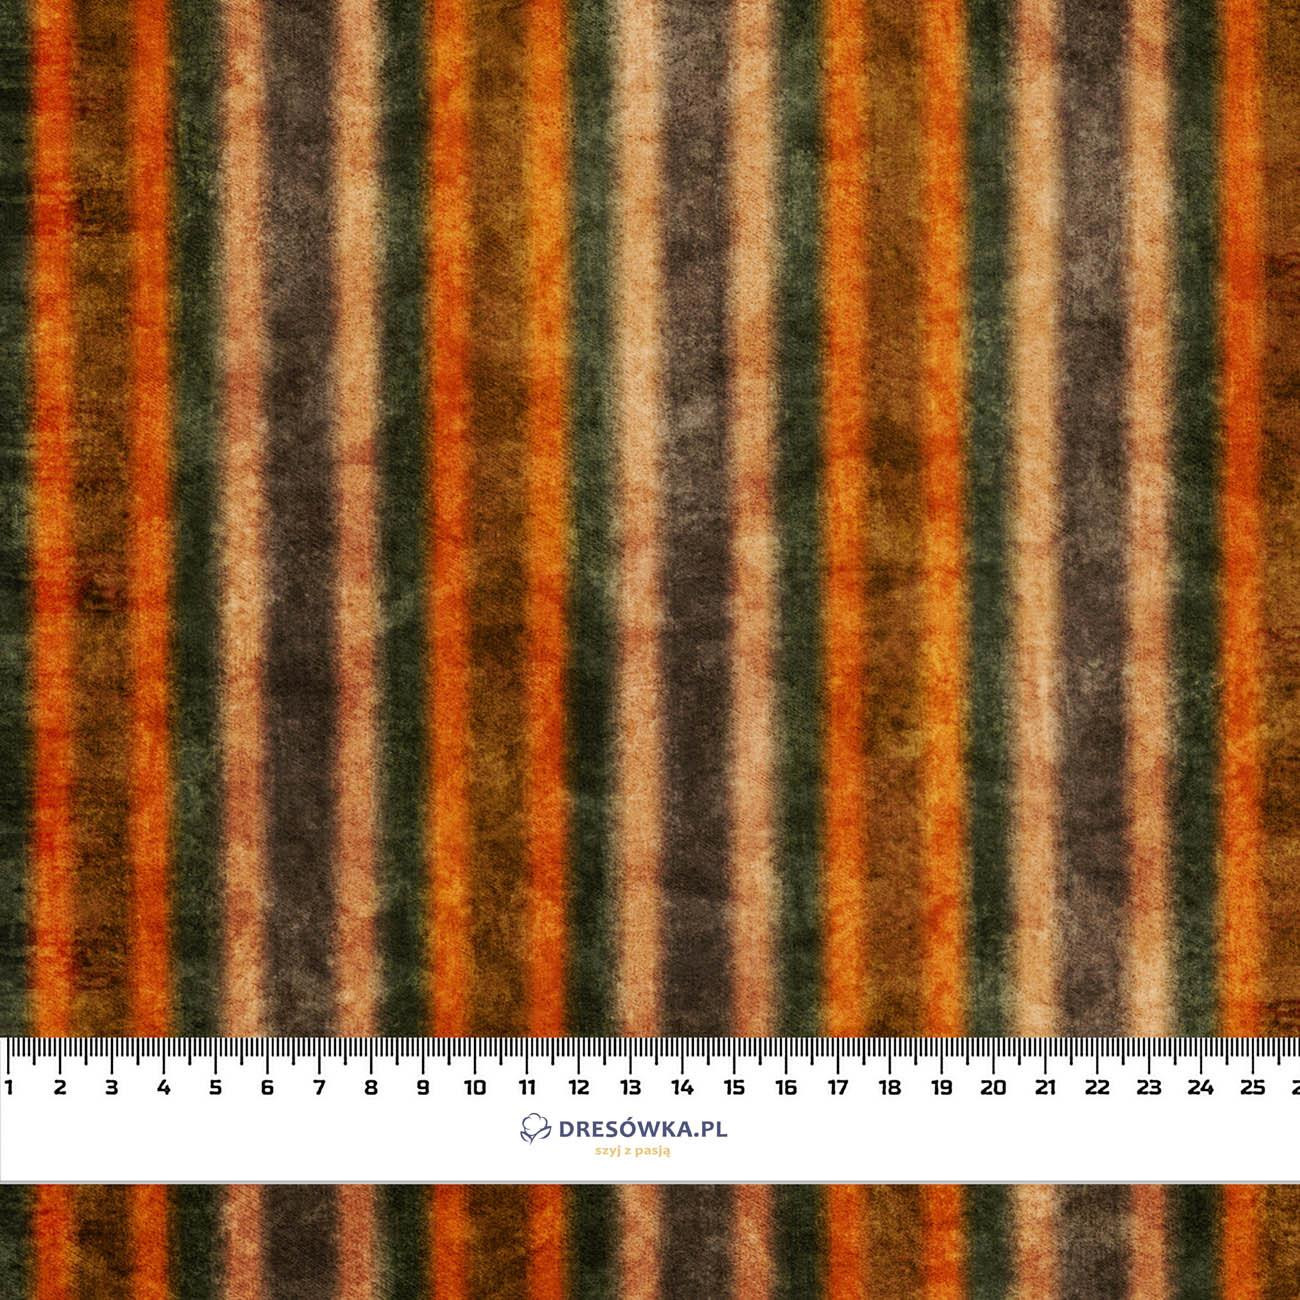 AUTUMN STRIPES  / colorful (AUTUMN COLORS) - Waterproof woven fabric